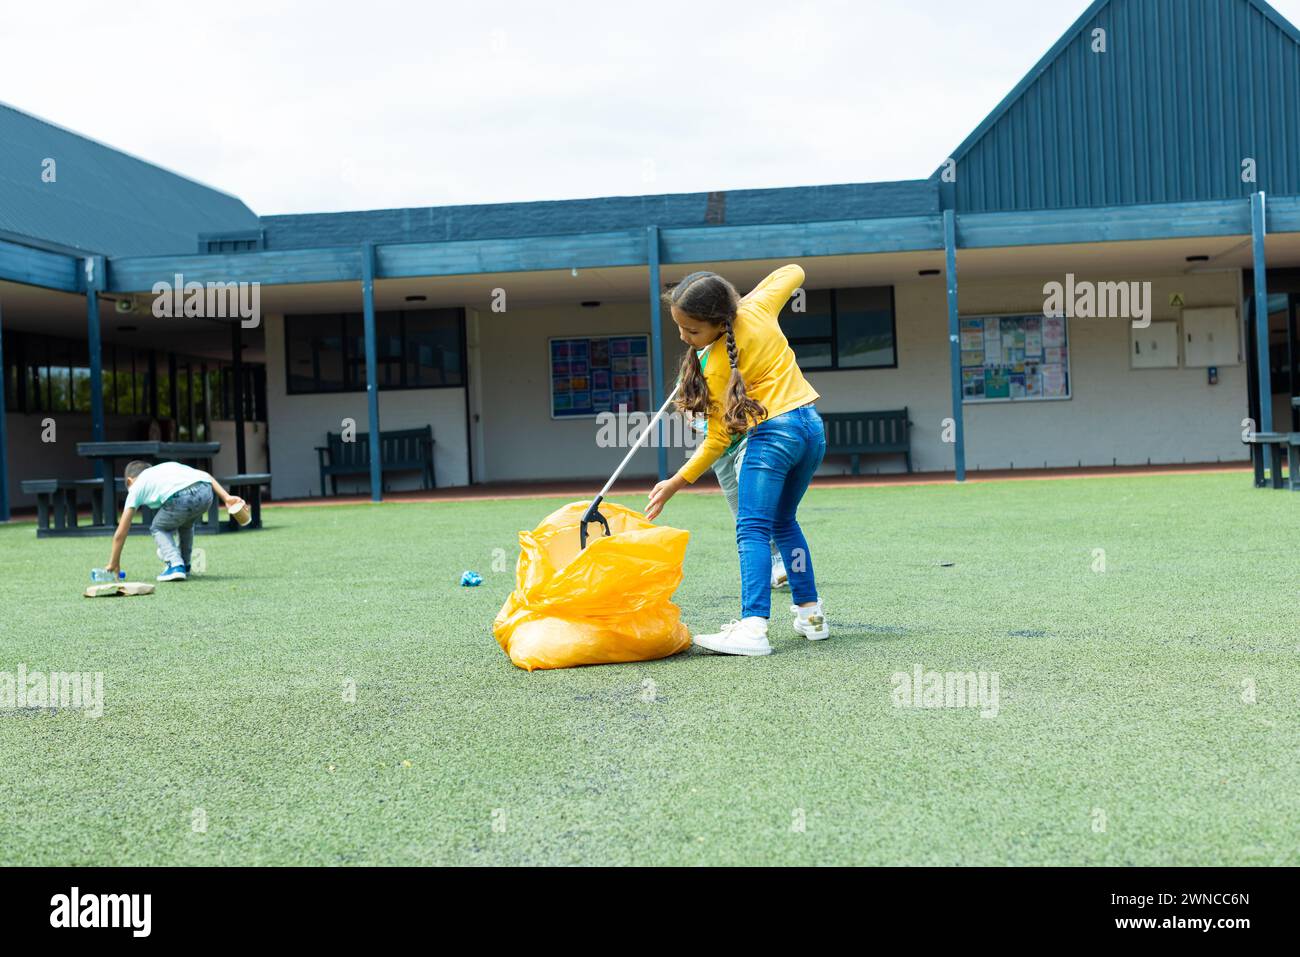 Biracial girl in a yellow top participates in a cleanup, collecting trash in a yellow bag Stock Photo